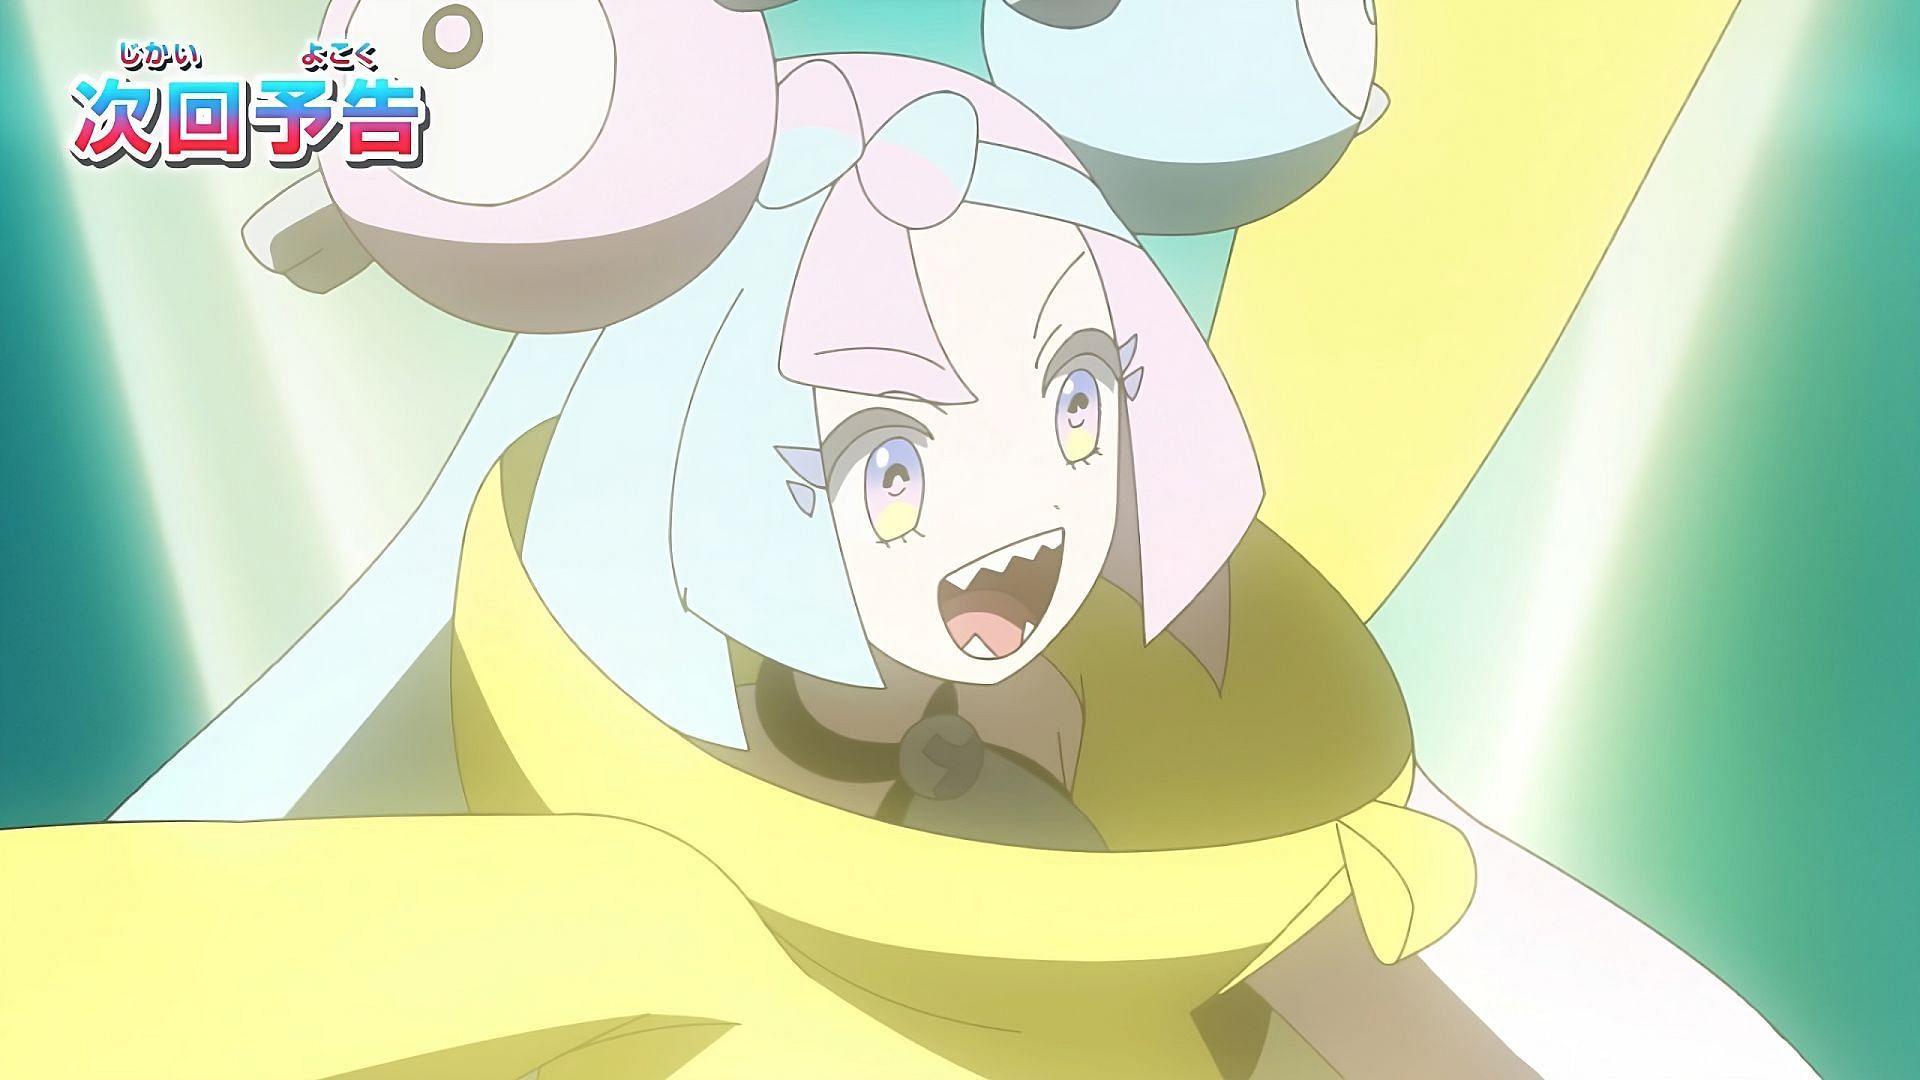 A Pokemon Horizons preview shows Iono, the Electric-type streamer and gym leader of Levincia.